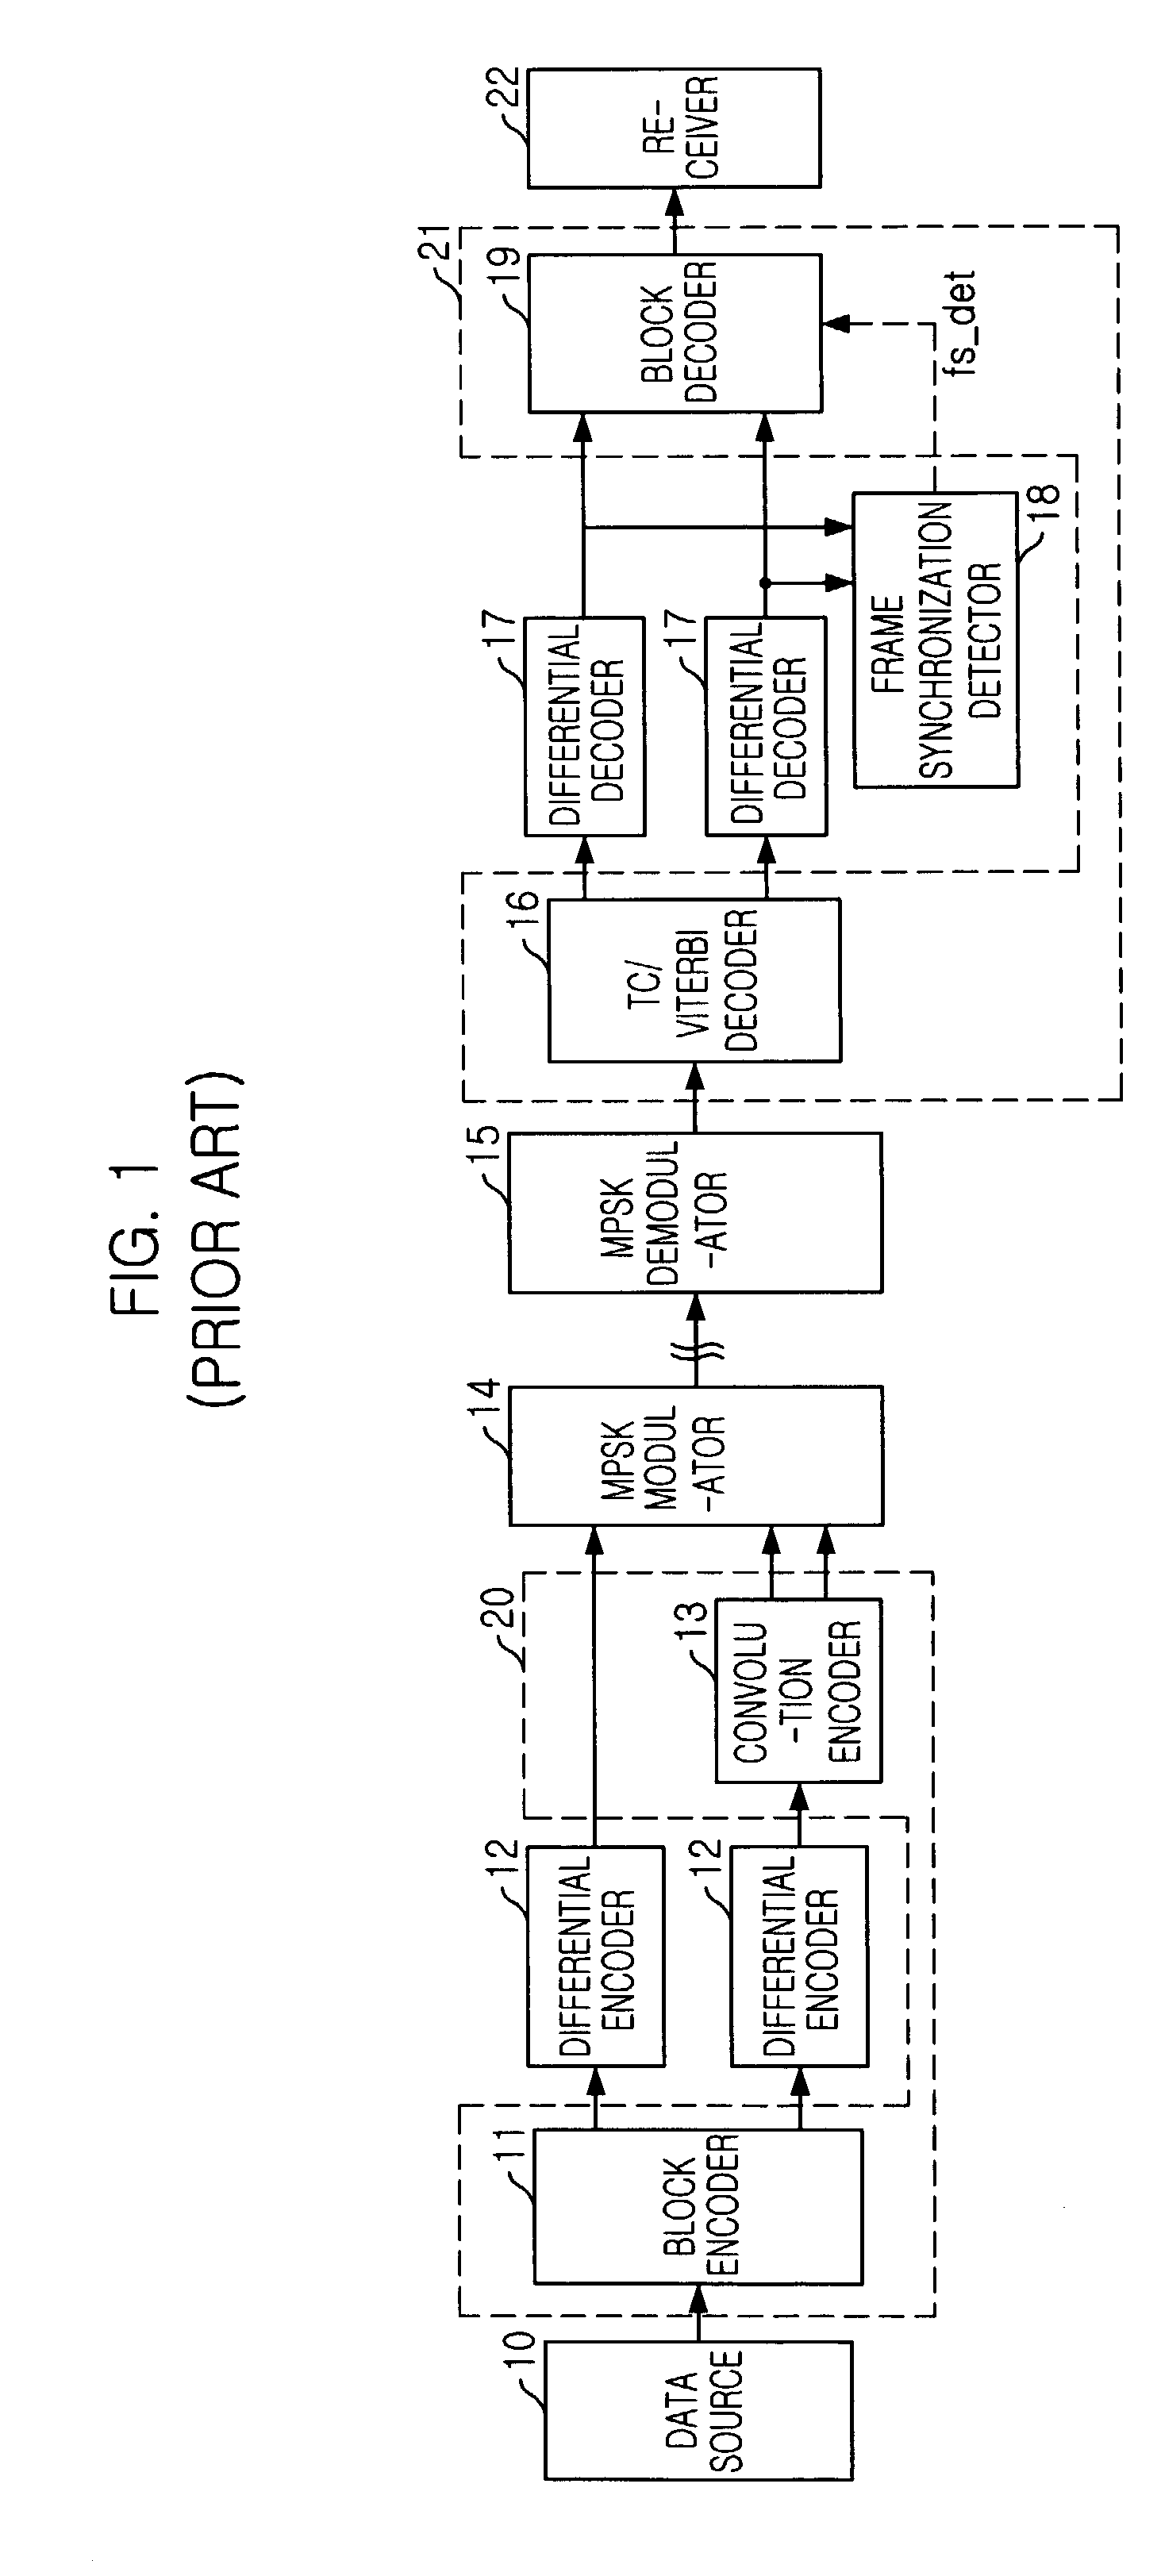 Apparatus for adaptive resolution of phase ambiguity value